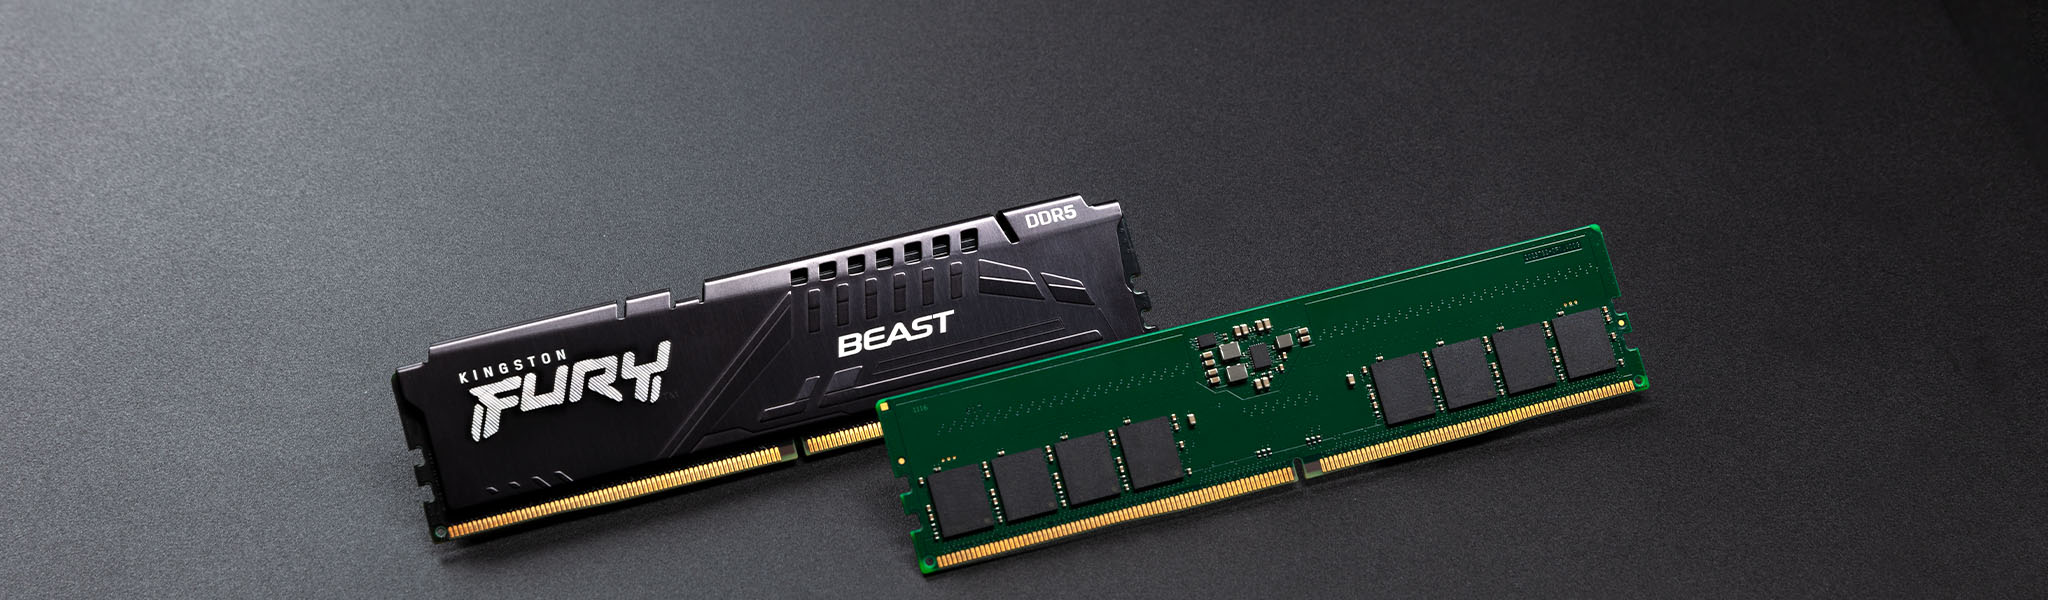 Learn more about DDR5 memory